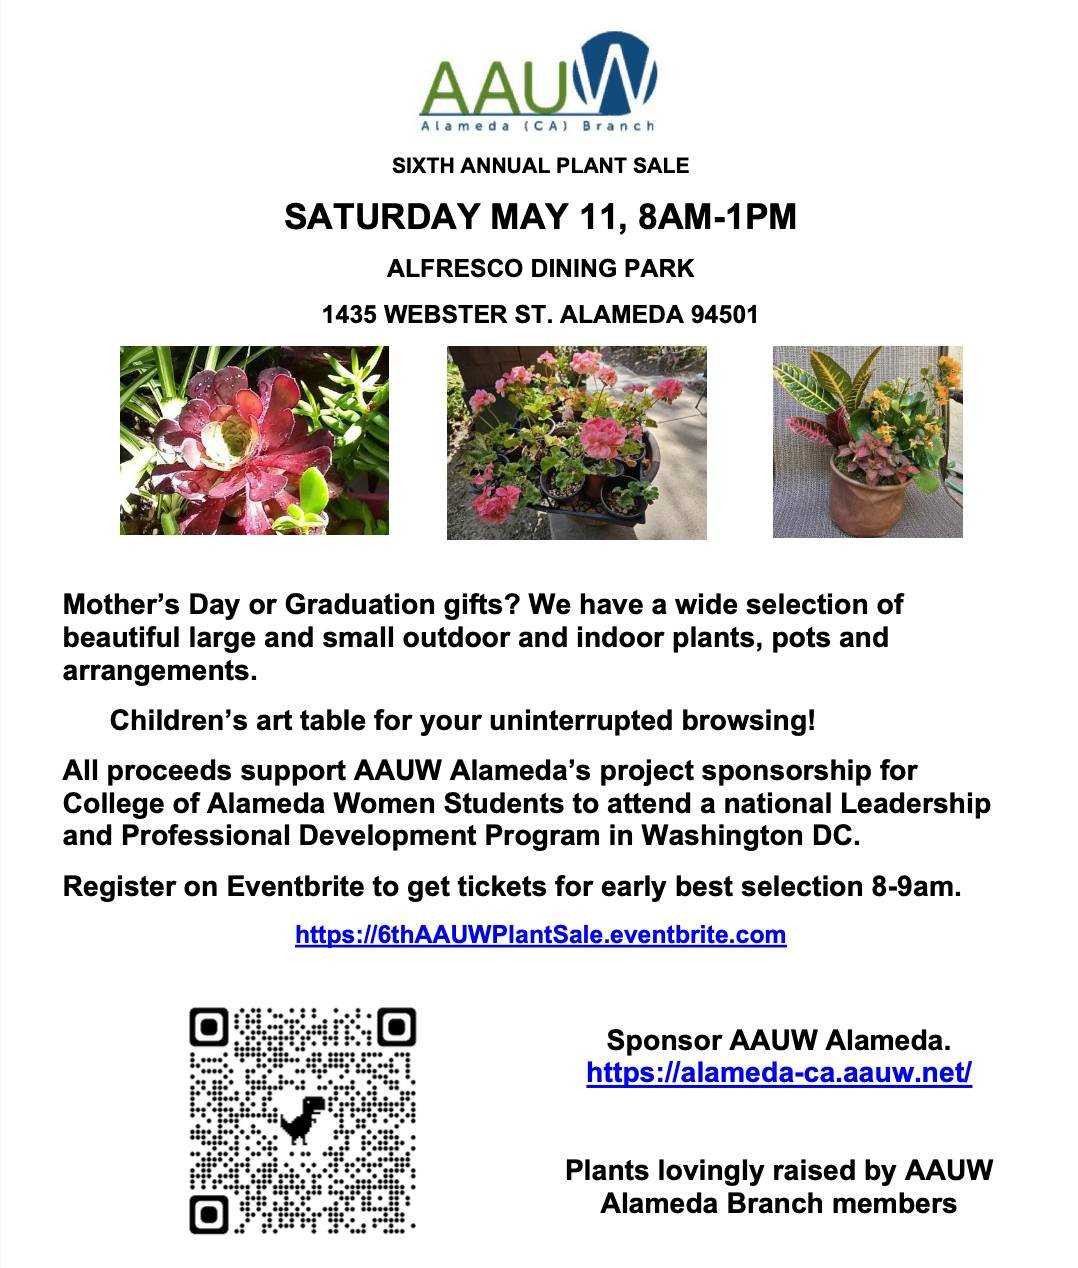 SIXTH ANNUAL PLANT SALE
Sat. May 11, 8AM-1PM
WABA'S Healing Garden - 1435 WEBSTER ST., ALAMEDA

Mother&rsquo;s Day or Graduation gifts? We have a wide selection of
beautiful large and small outdoor and indoor plants, pots and
arrangements. Children&r